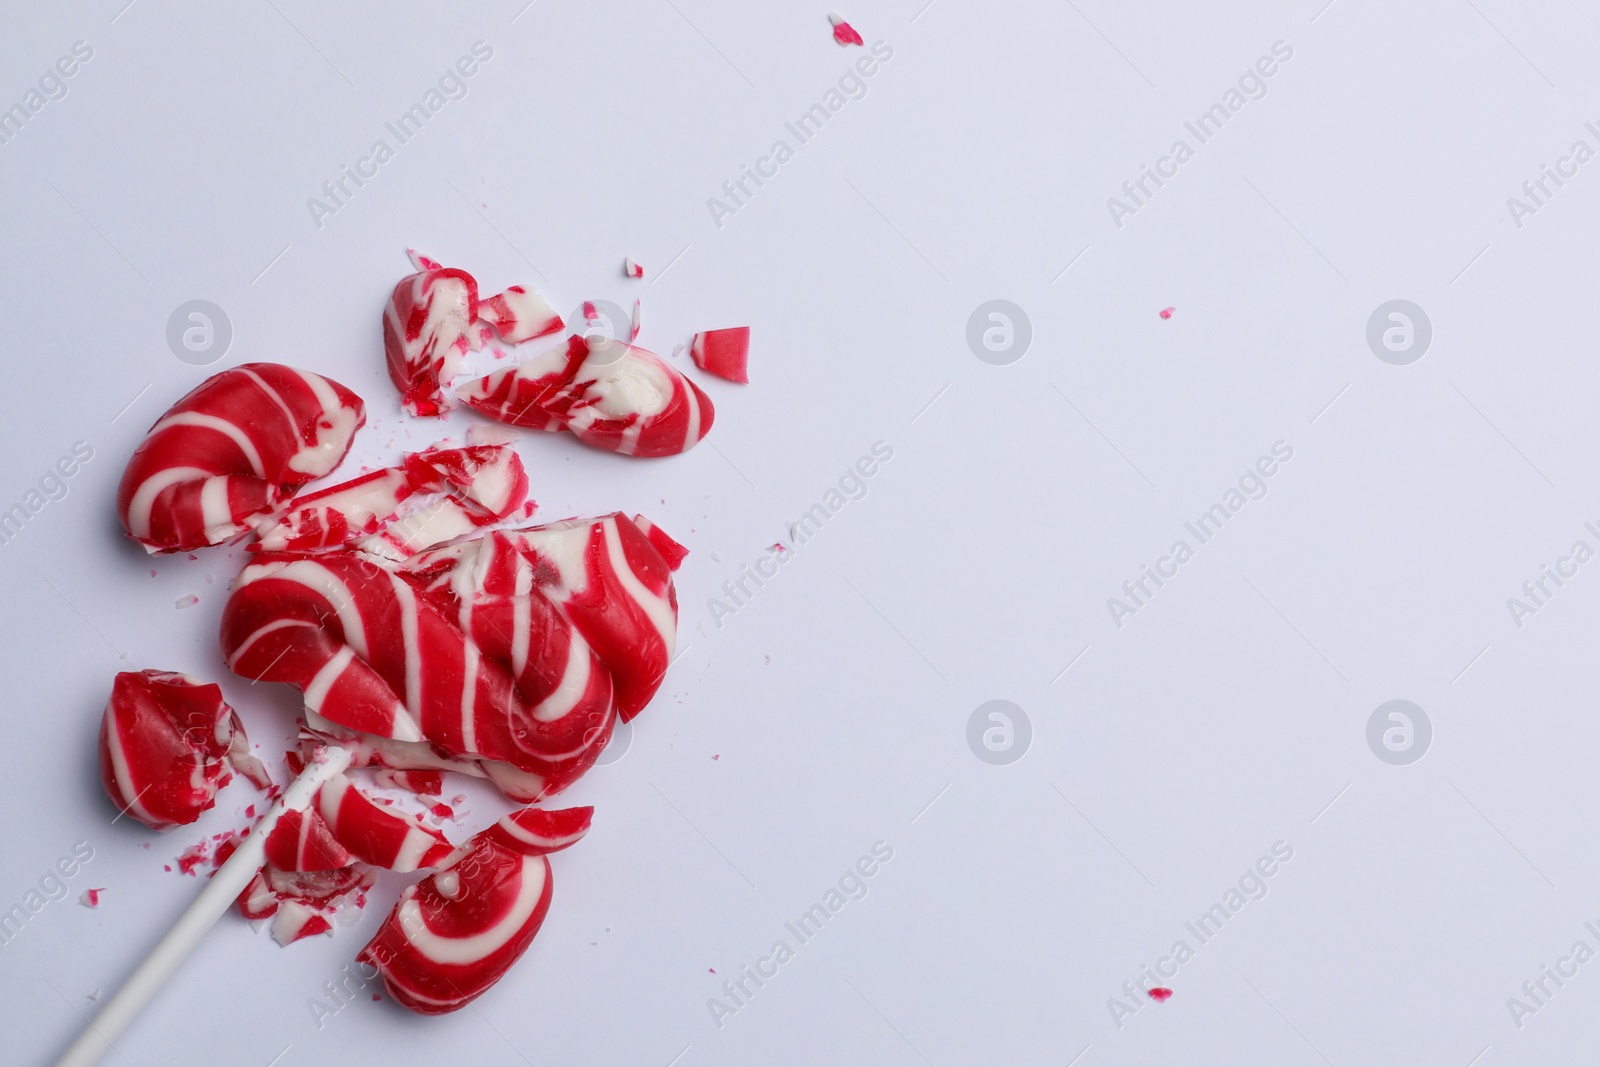 Photo of Smashed sweet lollipop on light background, top view. Space for text